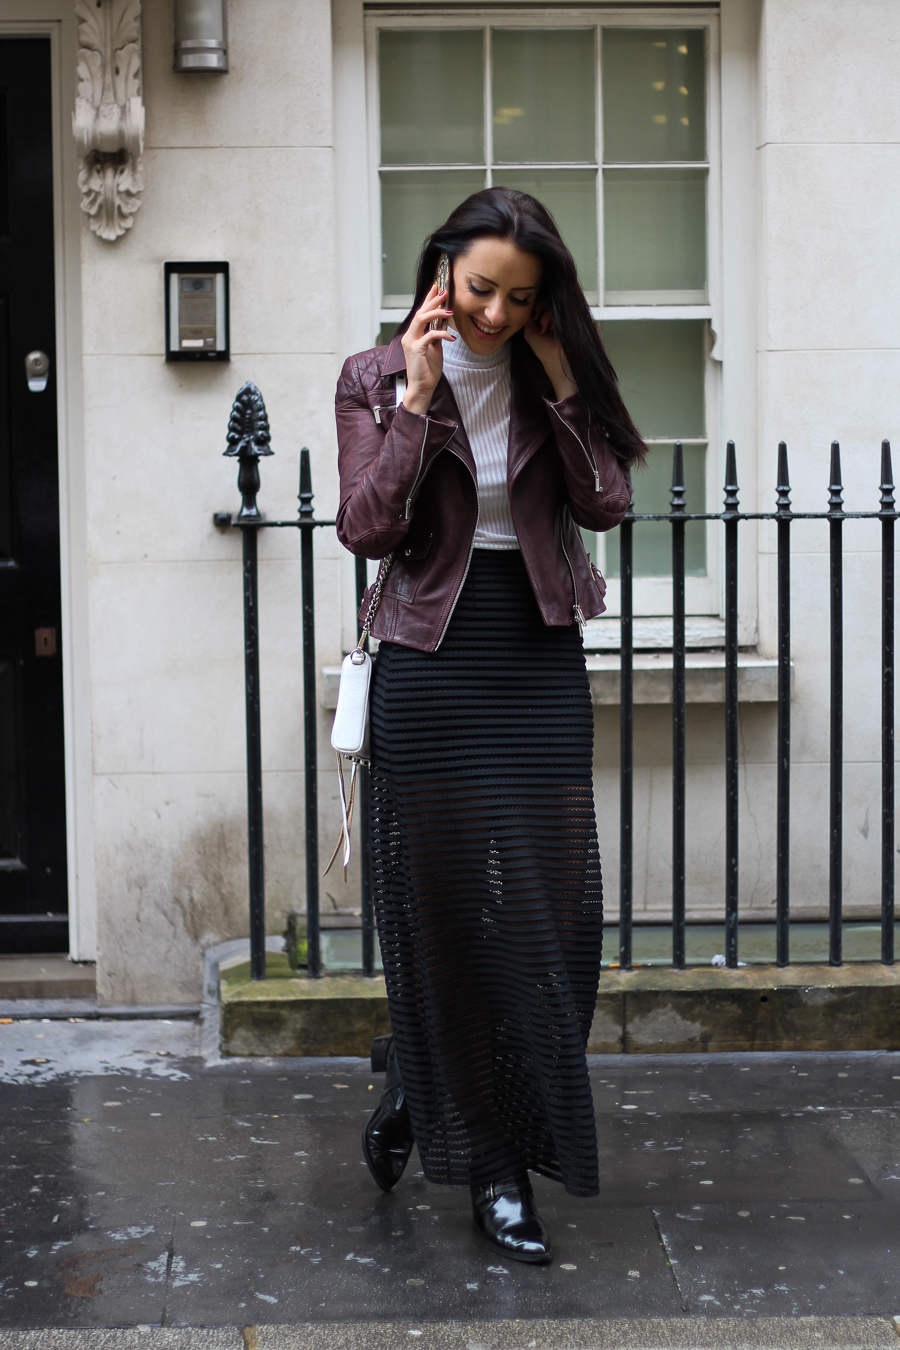 Clutch and carry on - sabrina chakici - london fashion week street style - September Style-8